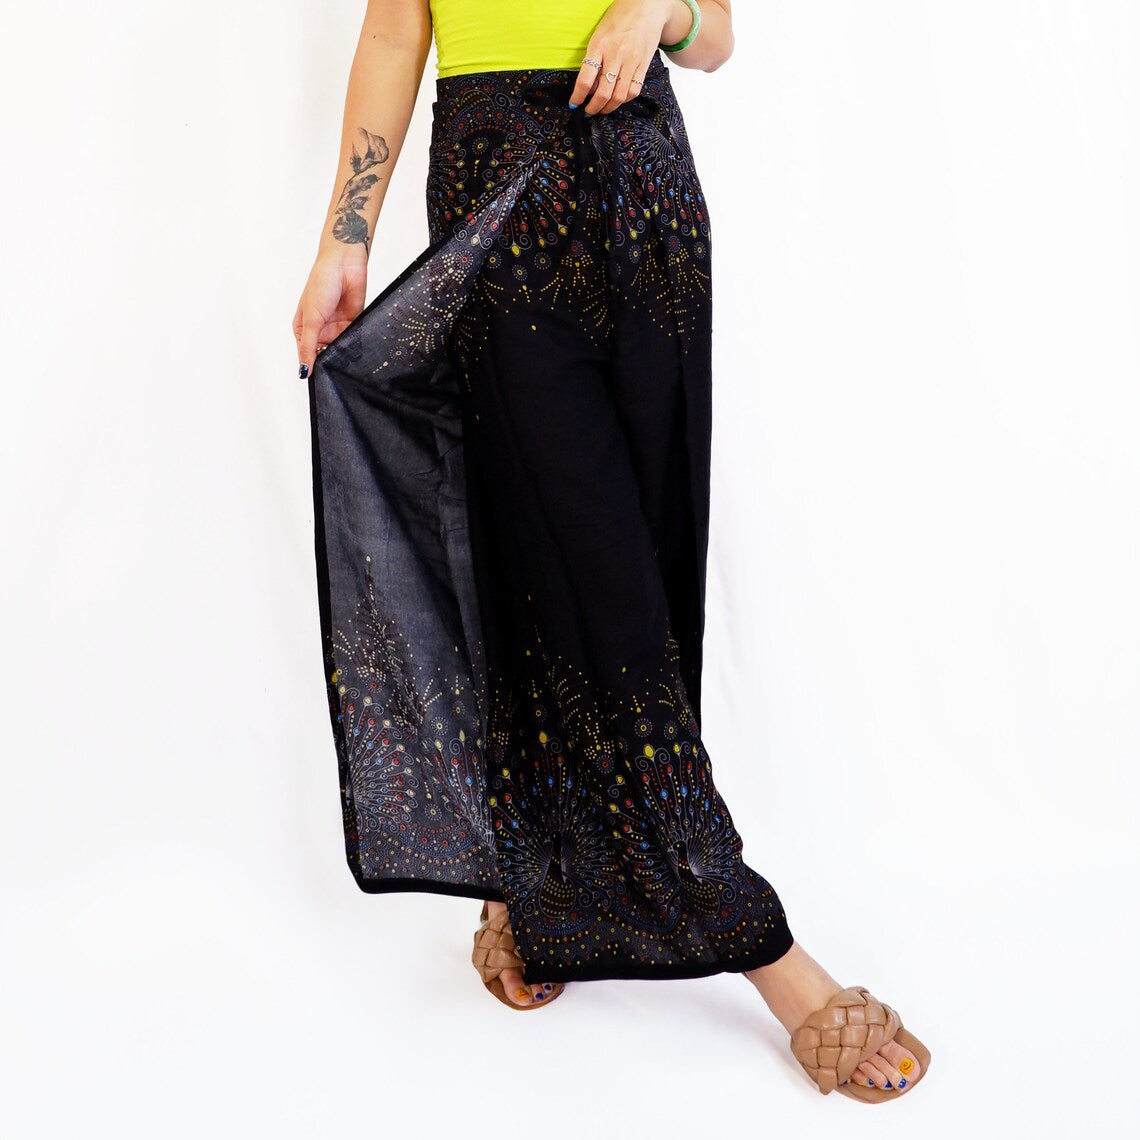 Fashion-forward black boho wrap pants featuring a vibrant peacock print, paired with a green top for a bold statement look.